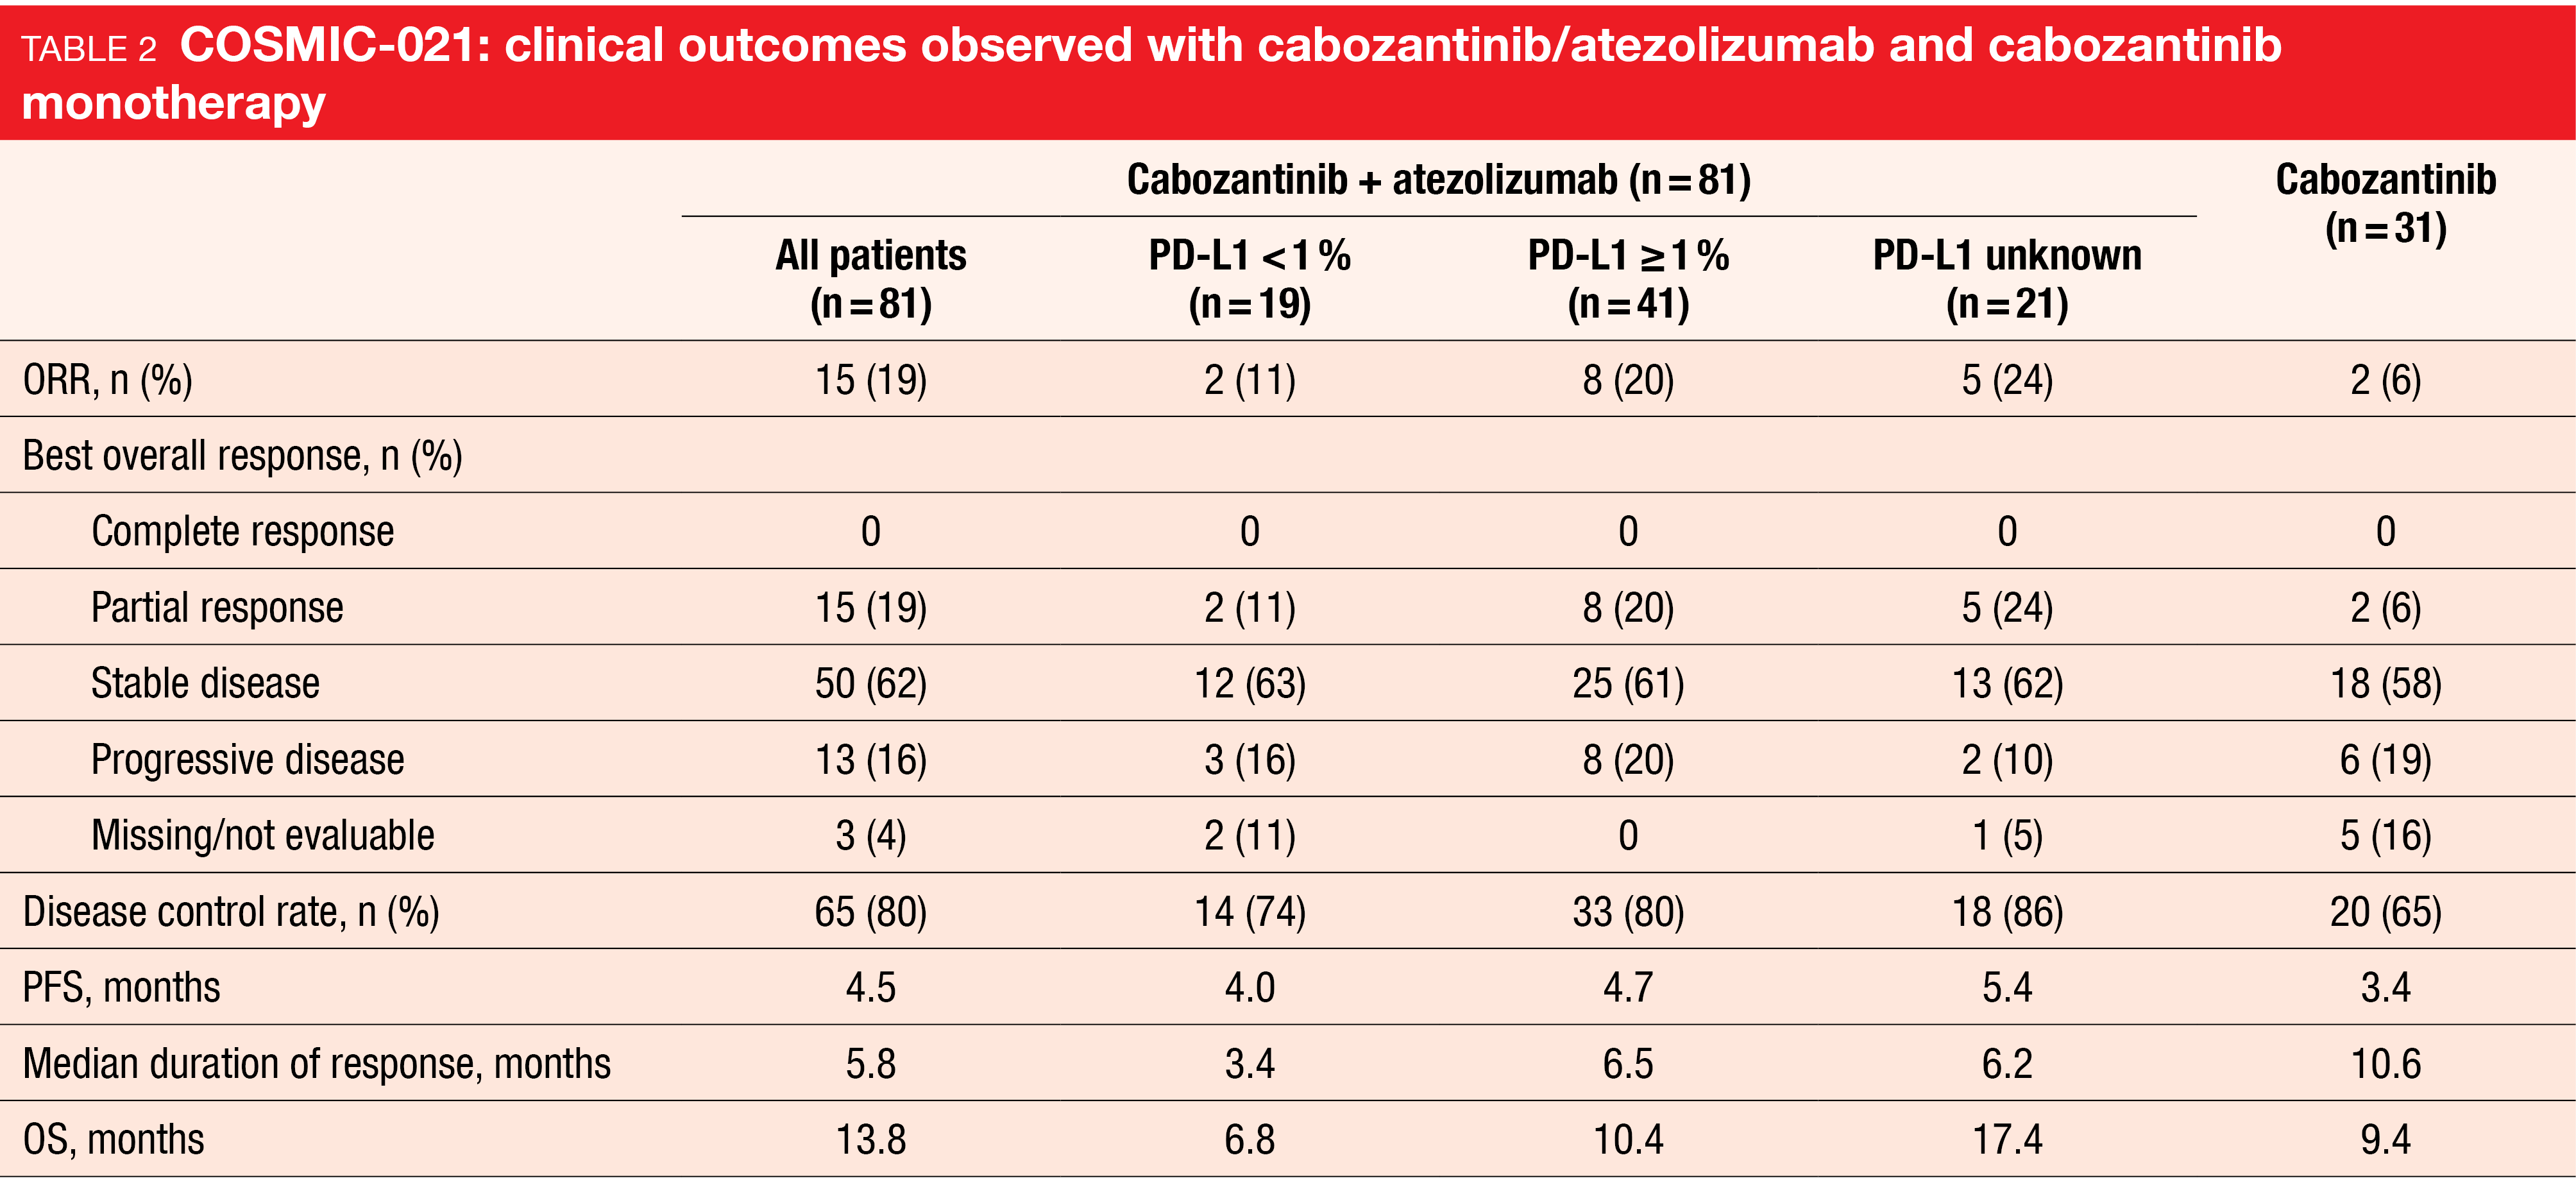 Table 2 COSMIC-021: clinical outcomes observed with cabozantinib/atezolizumab and cabozantinib monotherapy